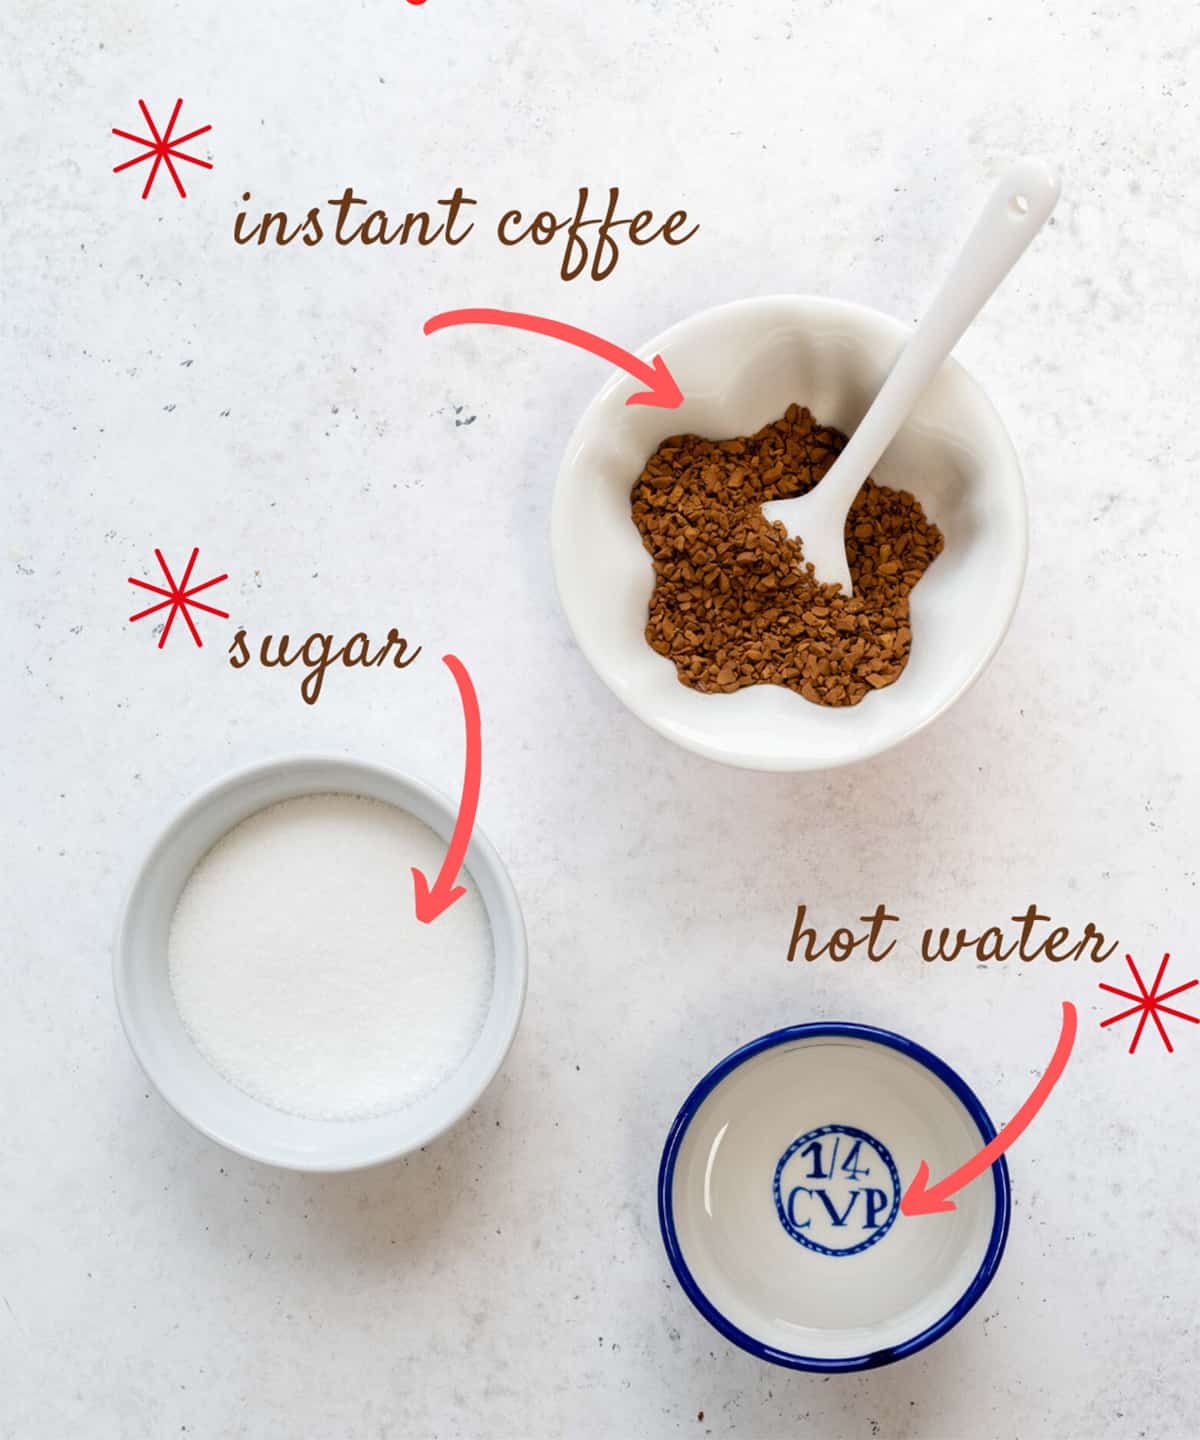 Whipped coffee ingredients: instant coffee, sugar and hot water